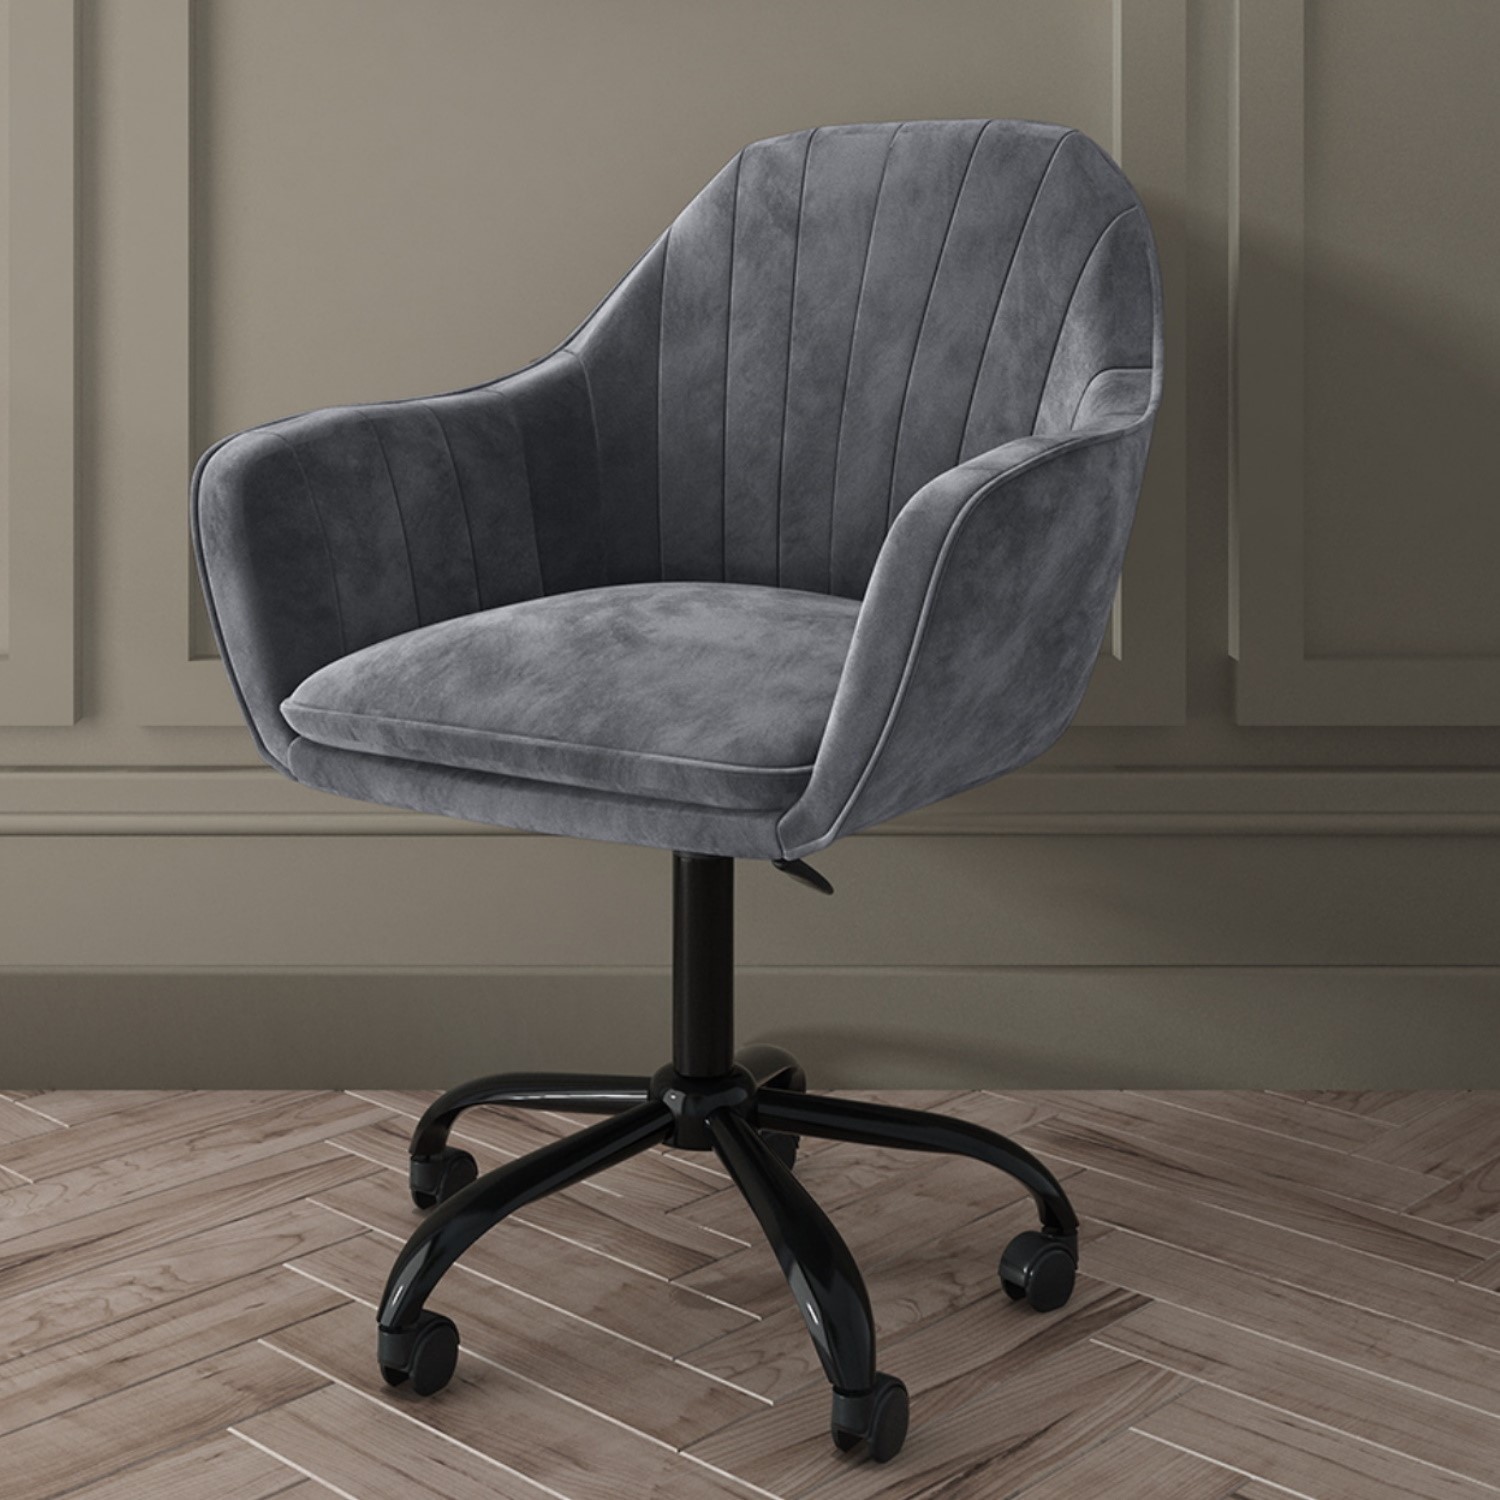 Photo of Grey velvet office chair with arms - logan